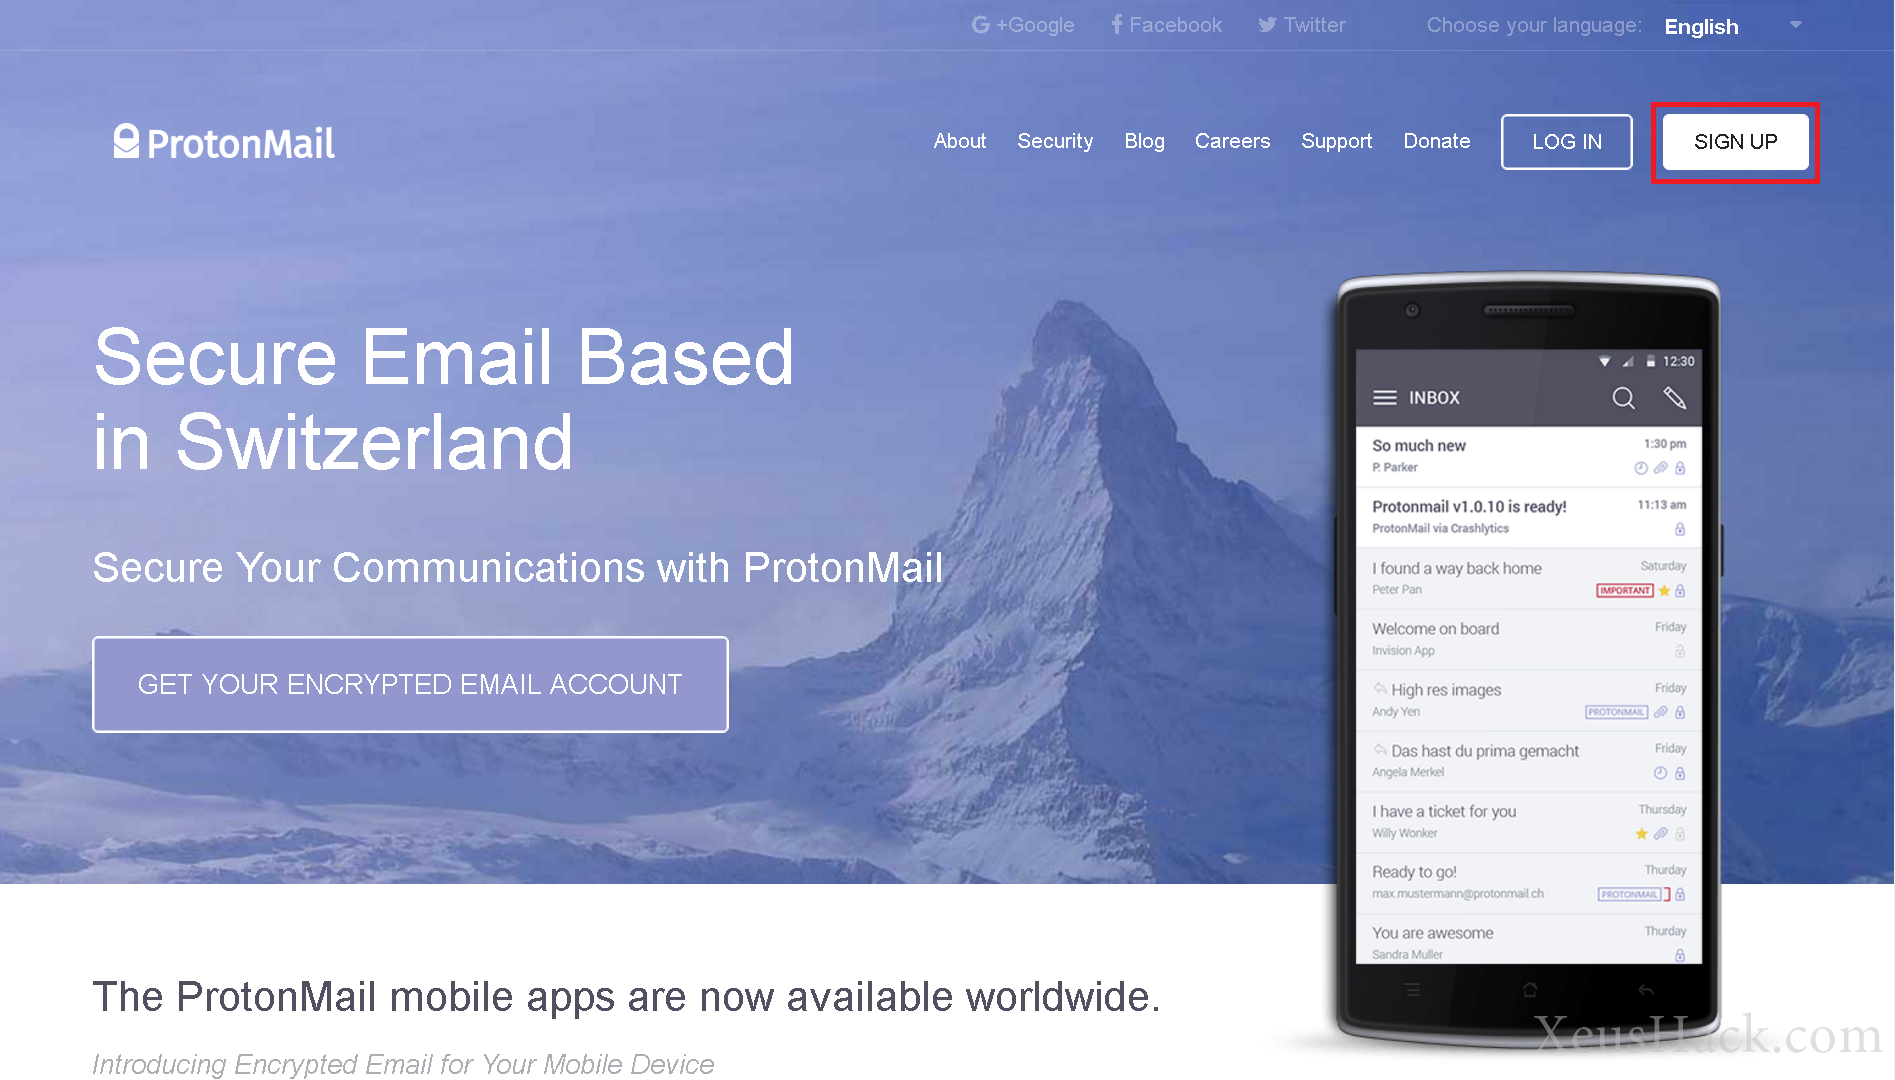 email services like protonmail